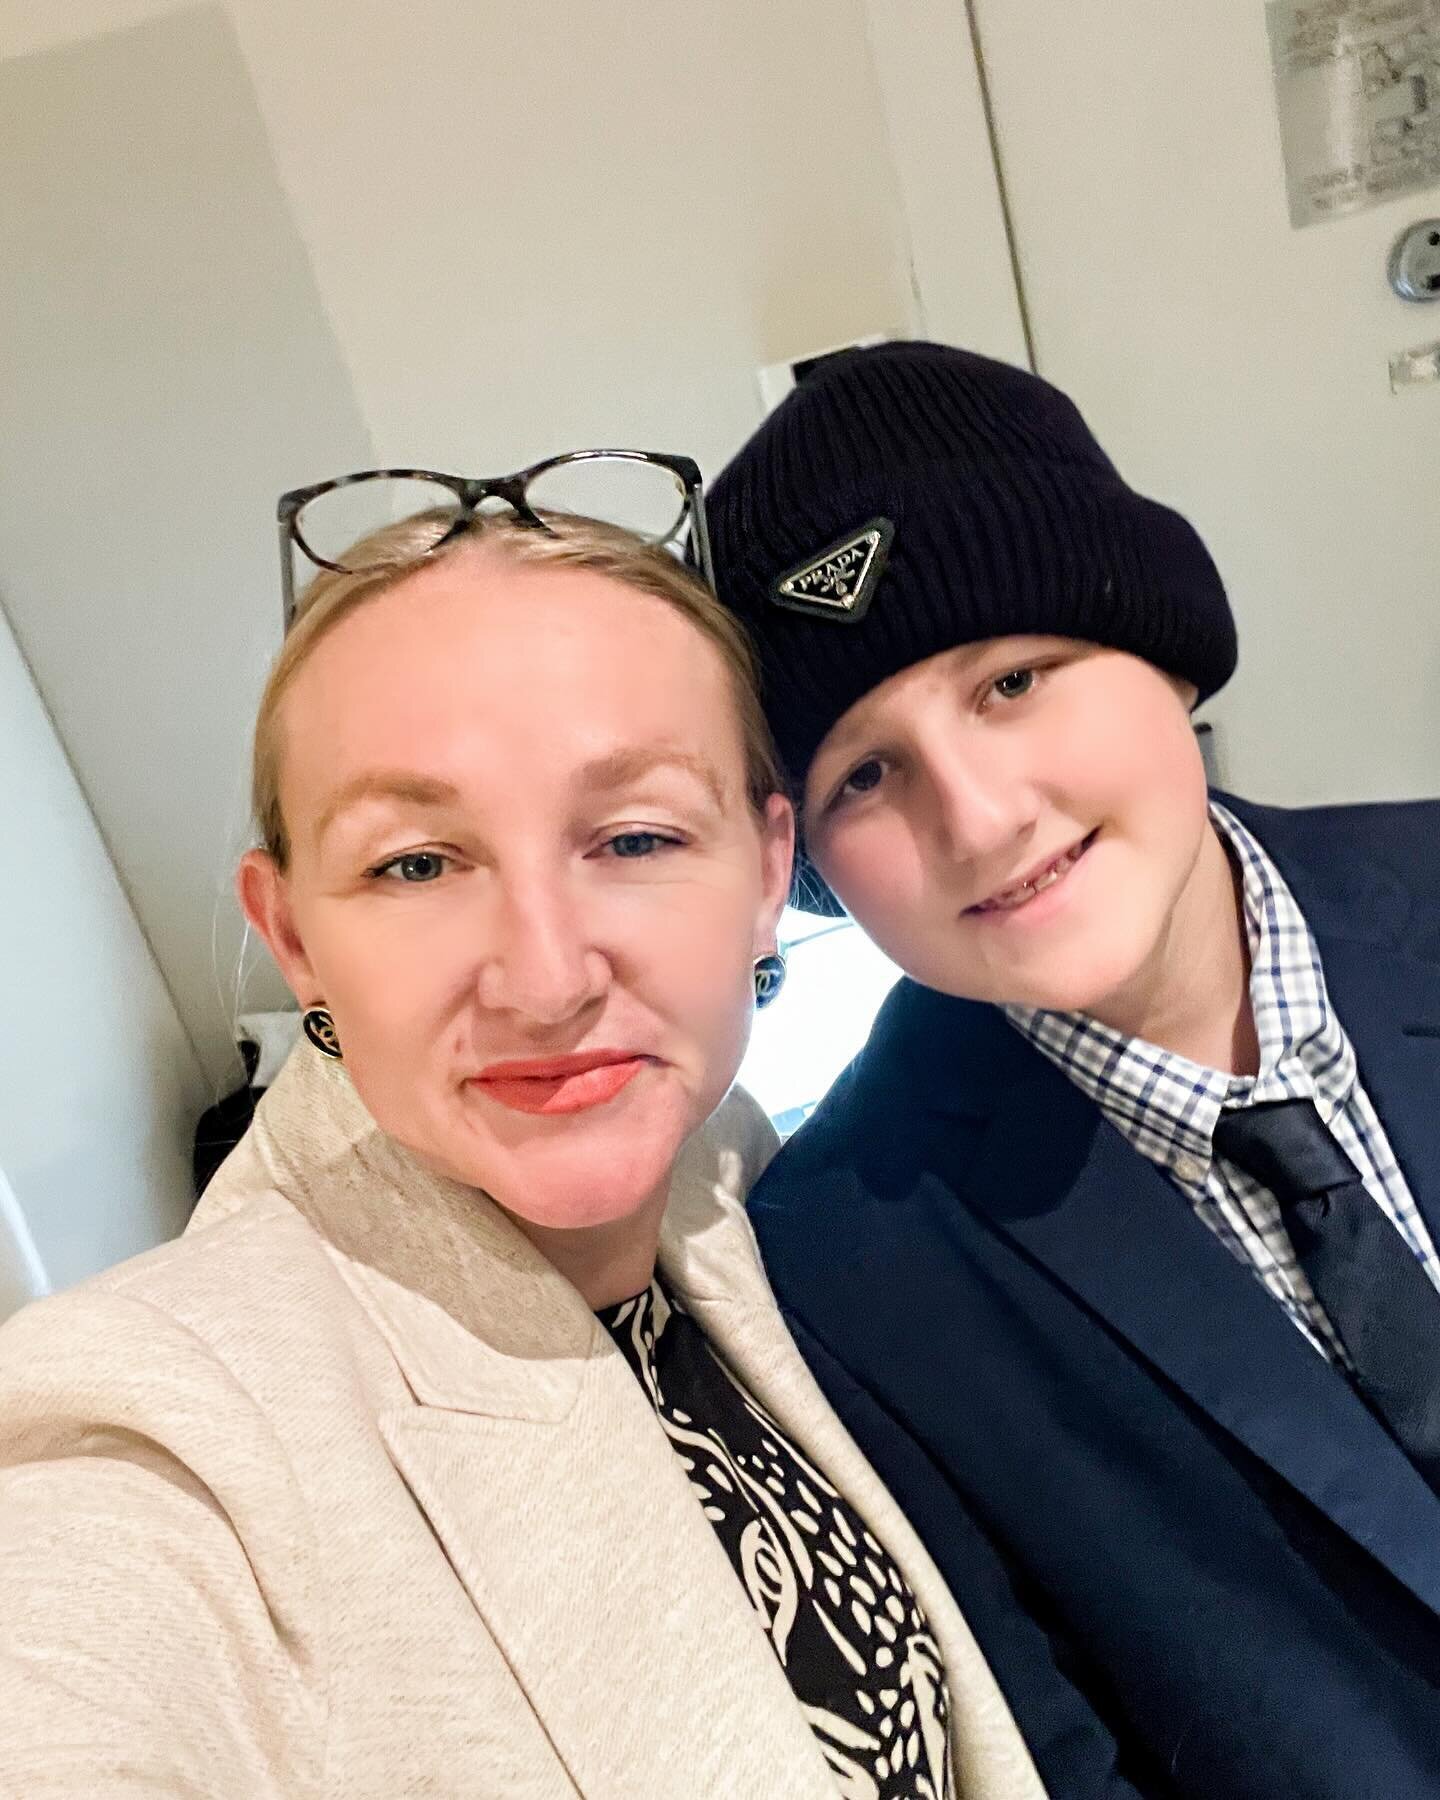 Being a mother, is the MOST IMPORTANT job I will ever have. It is also the ABSOLUTE BEST part of my life! 

What a fine young man, Jack has turned out to be.